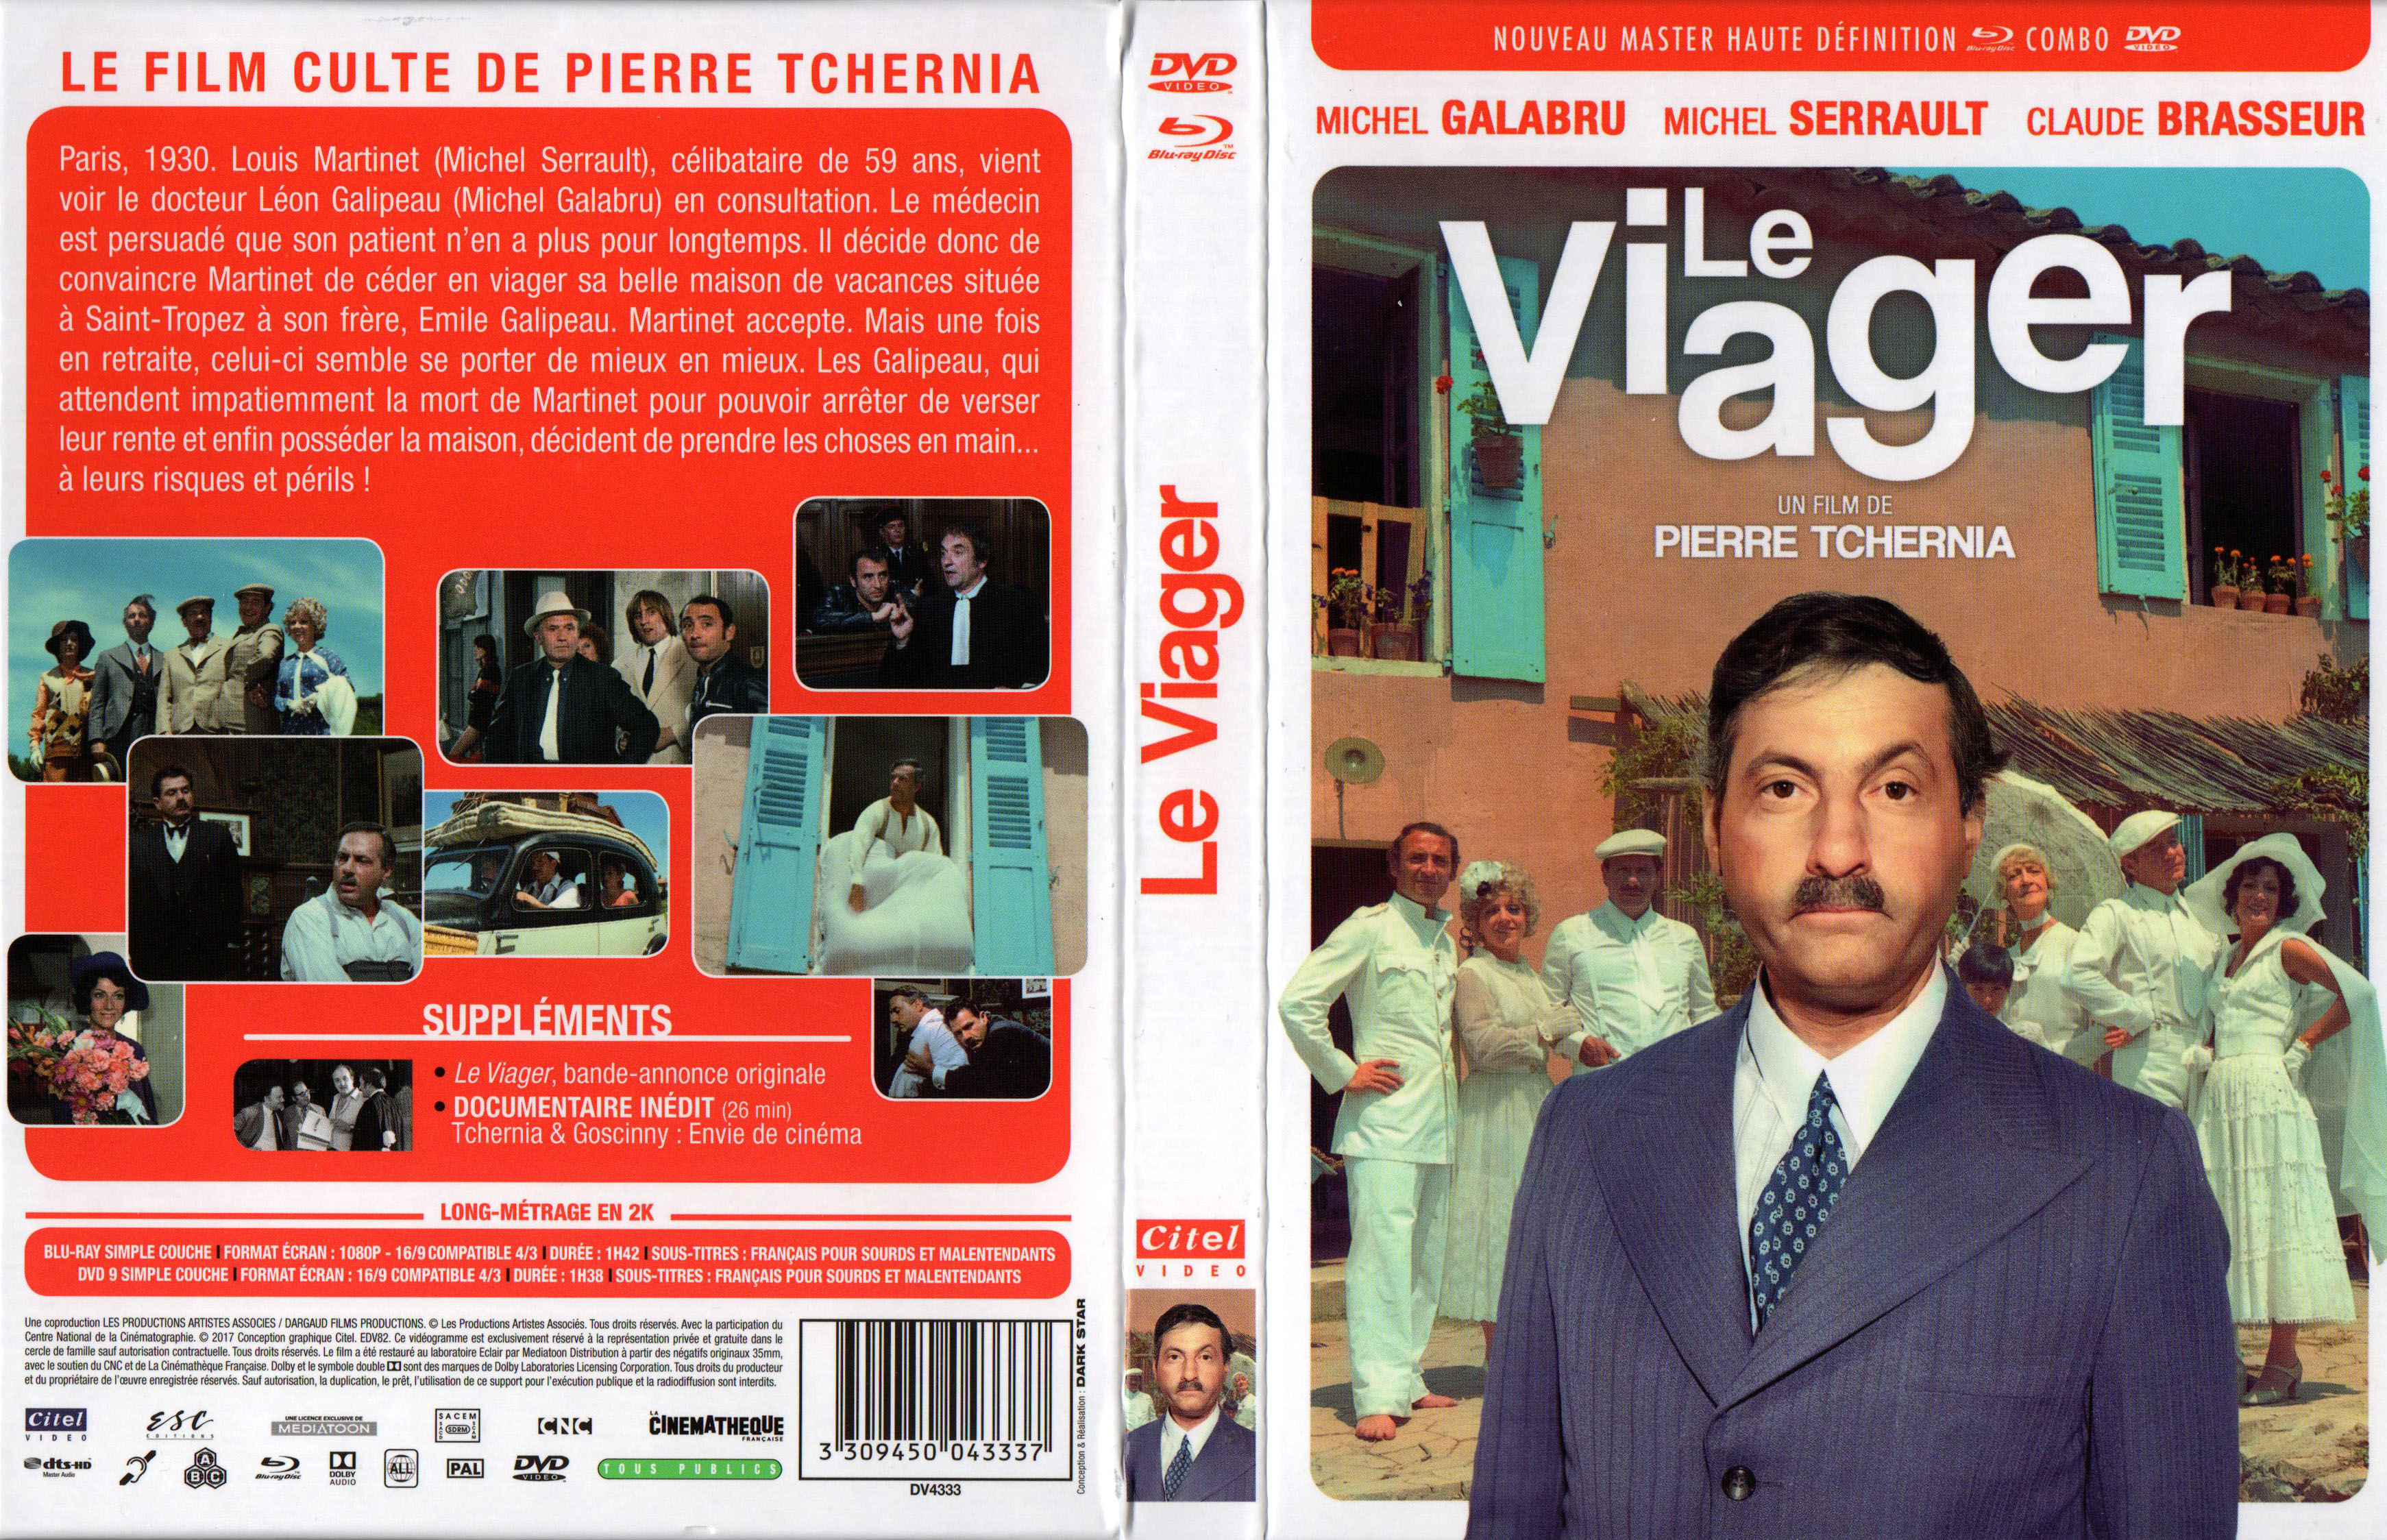 Jaquette DVD Le Viager (BLU-RAY)